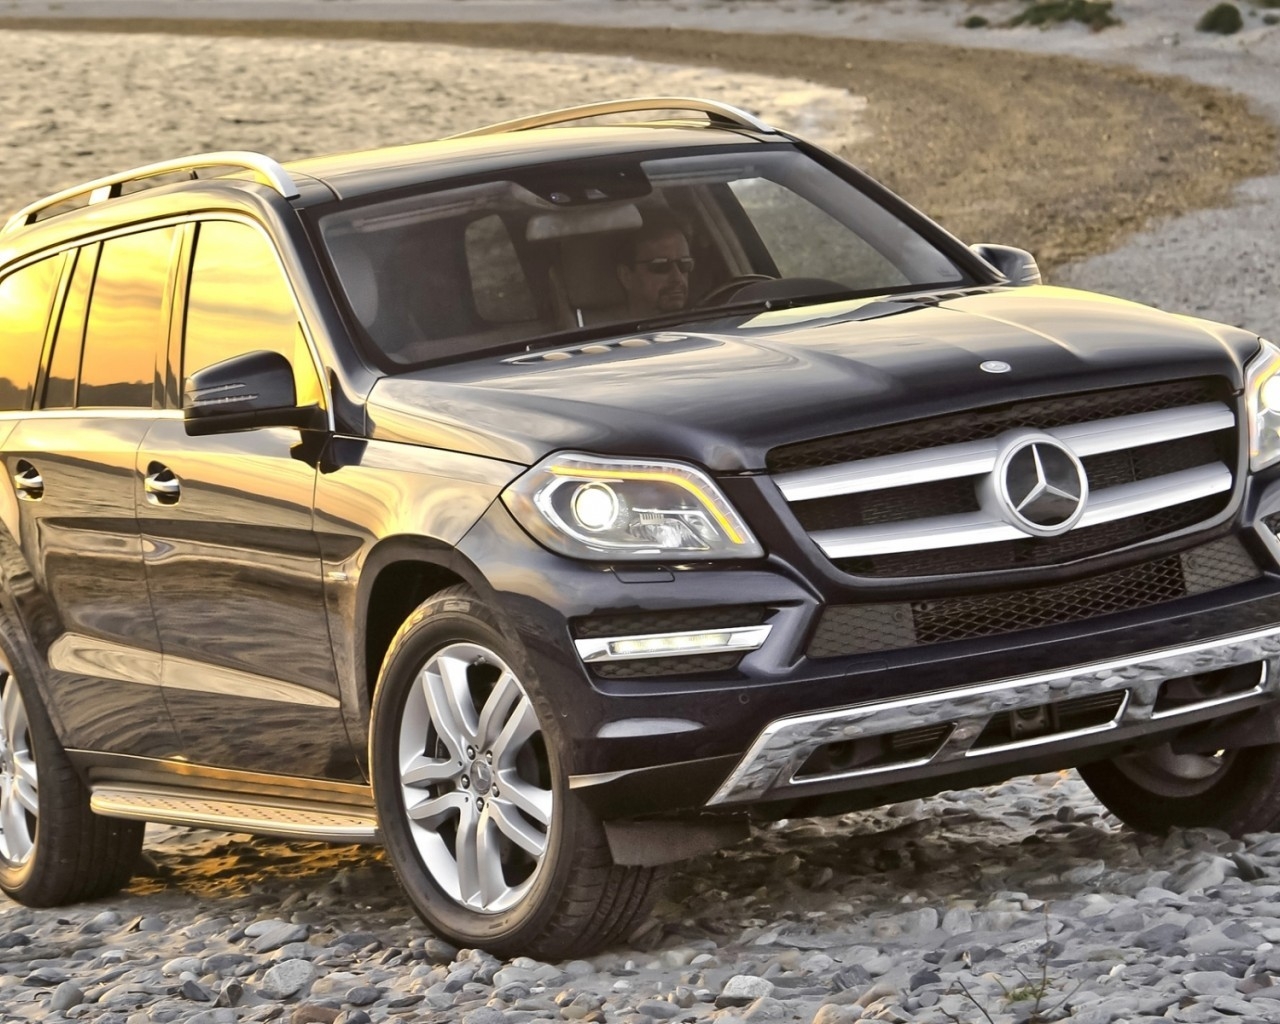 Mercedes-Benz GL 450 for 1280 x 1024 resolution